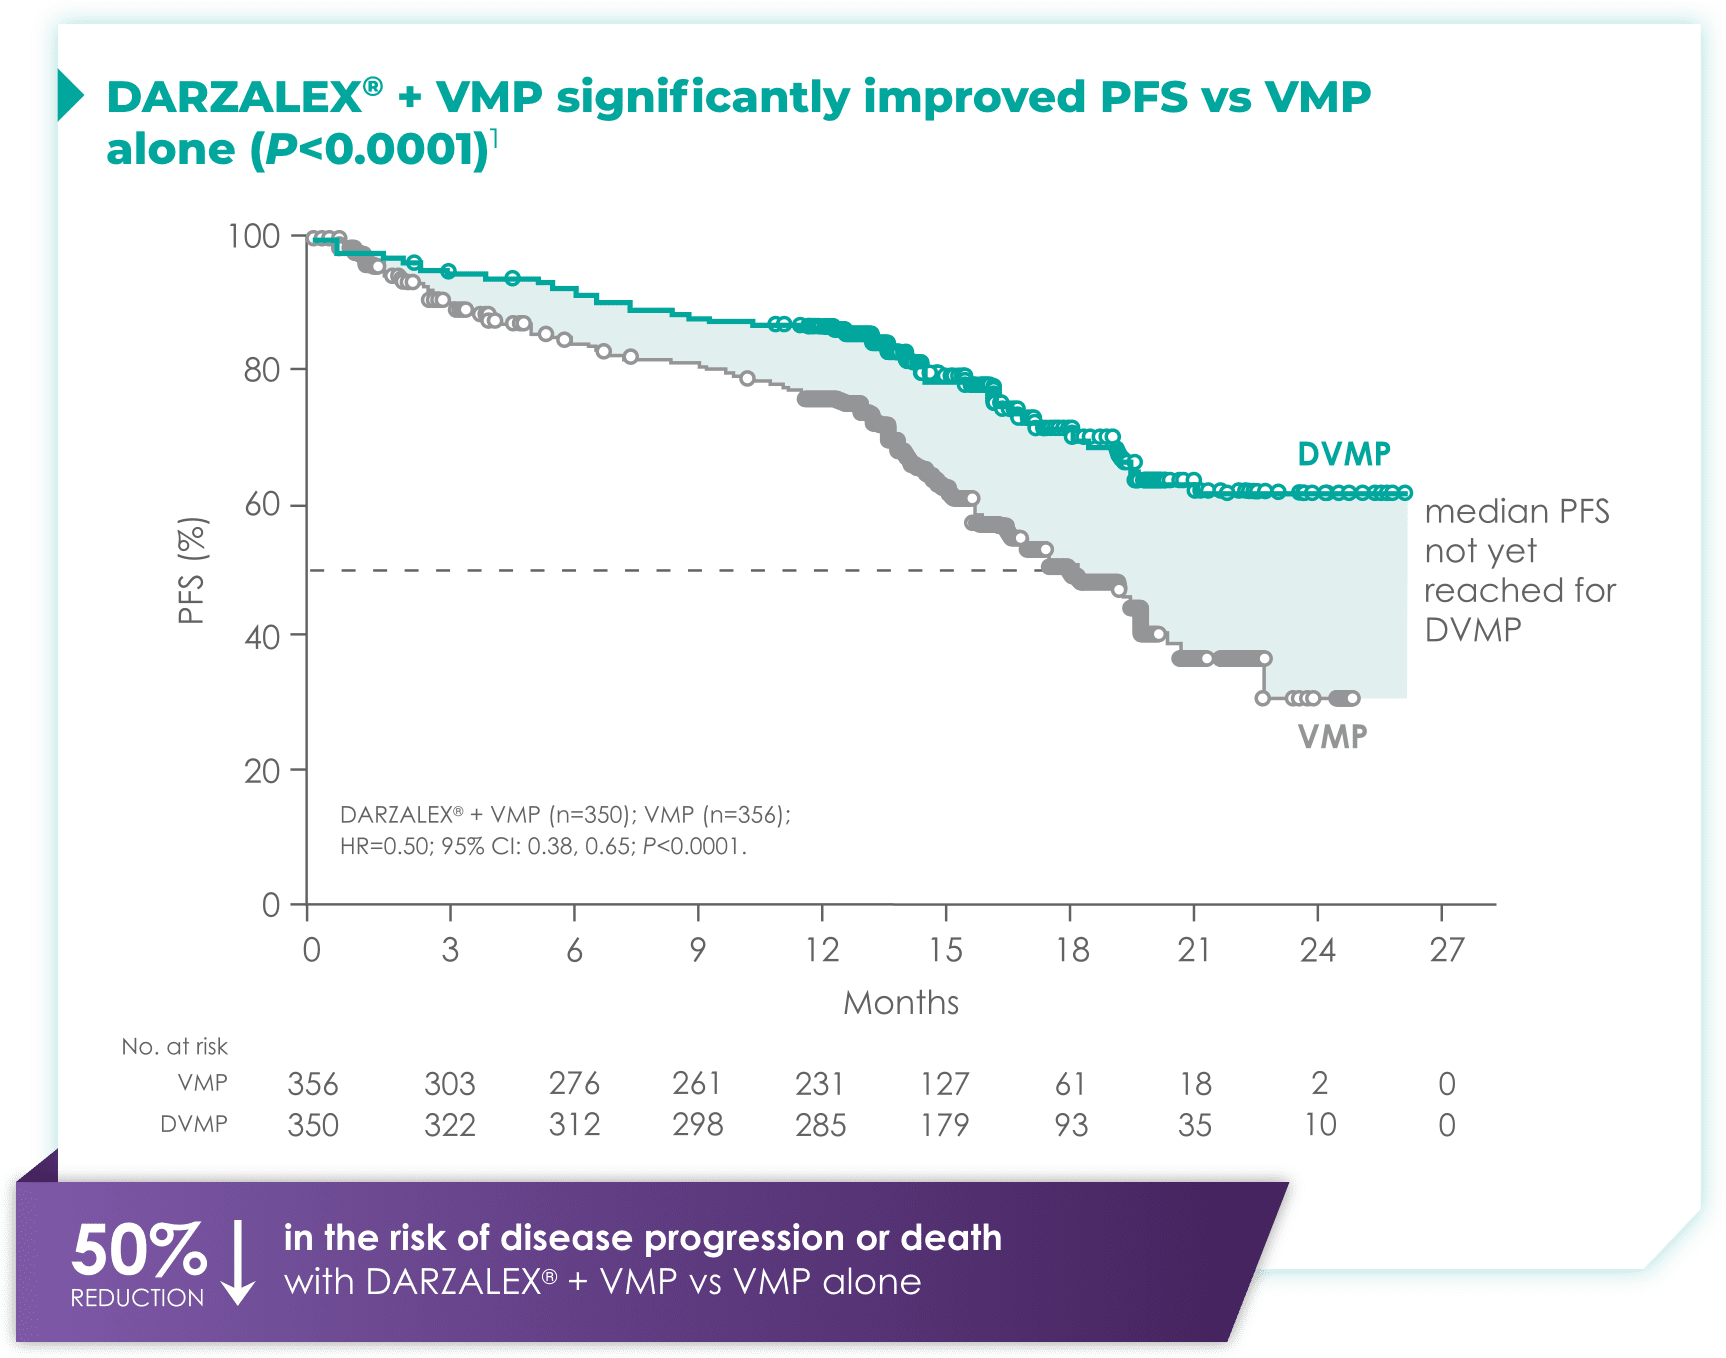 Chart showing 50% reduction in the risk of disease progression or death with DARZALEX® + VMP vs VMP alone